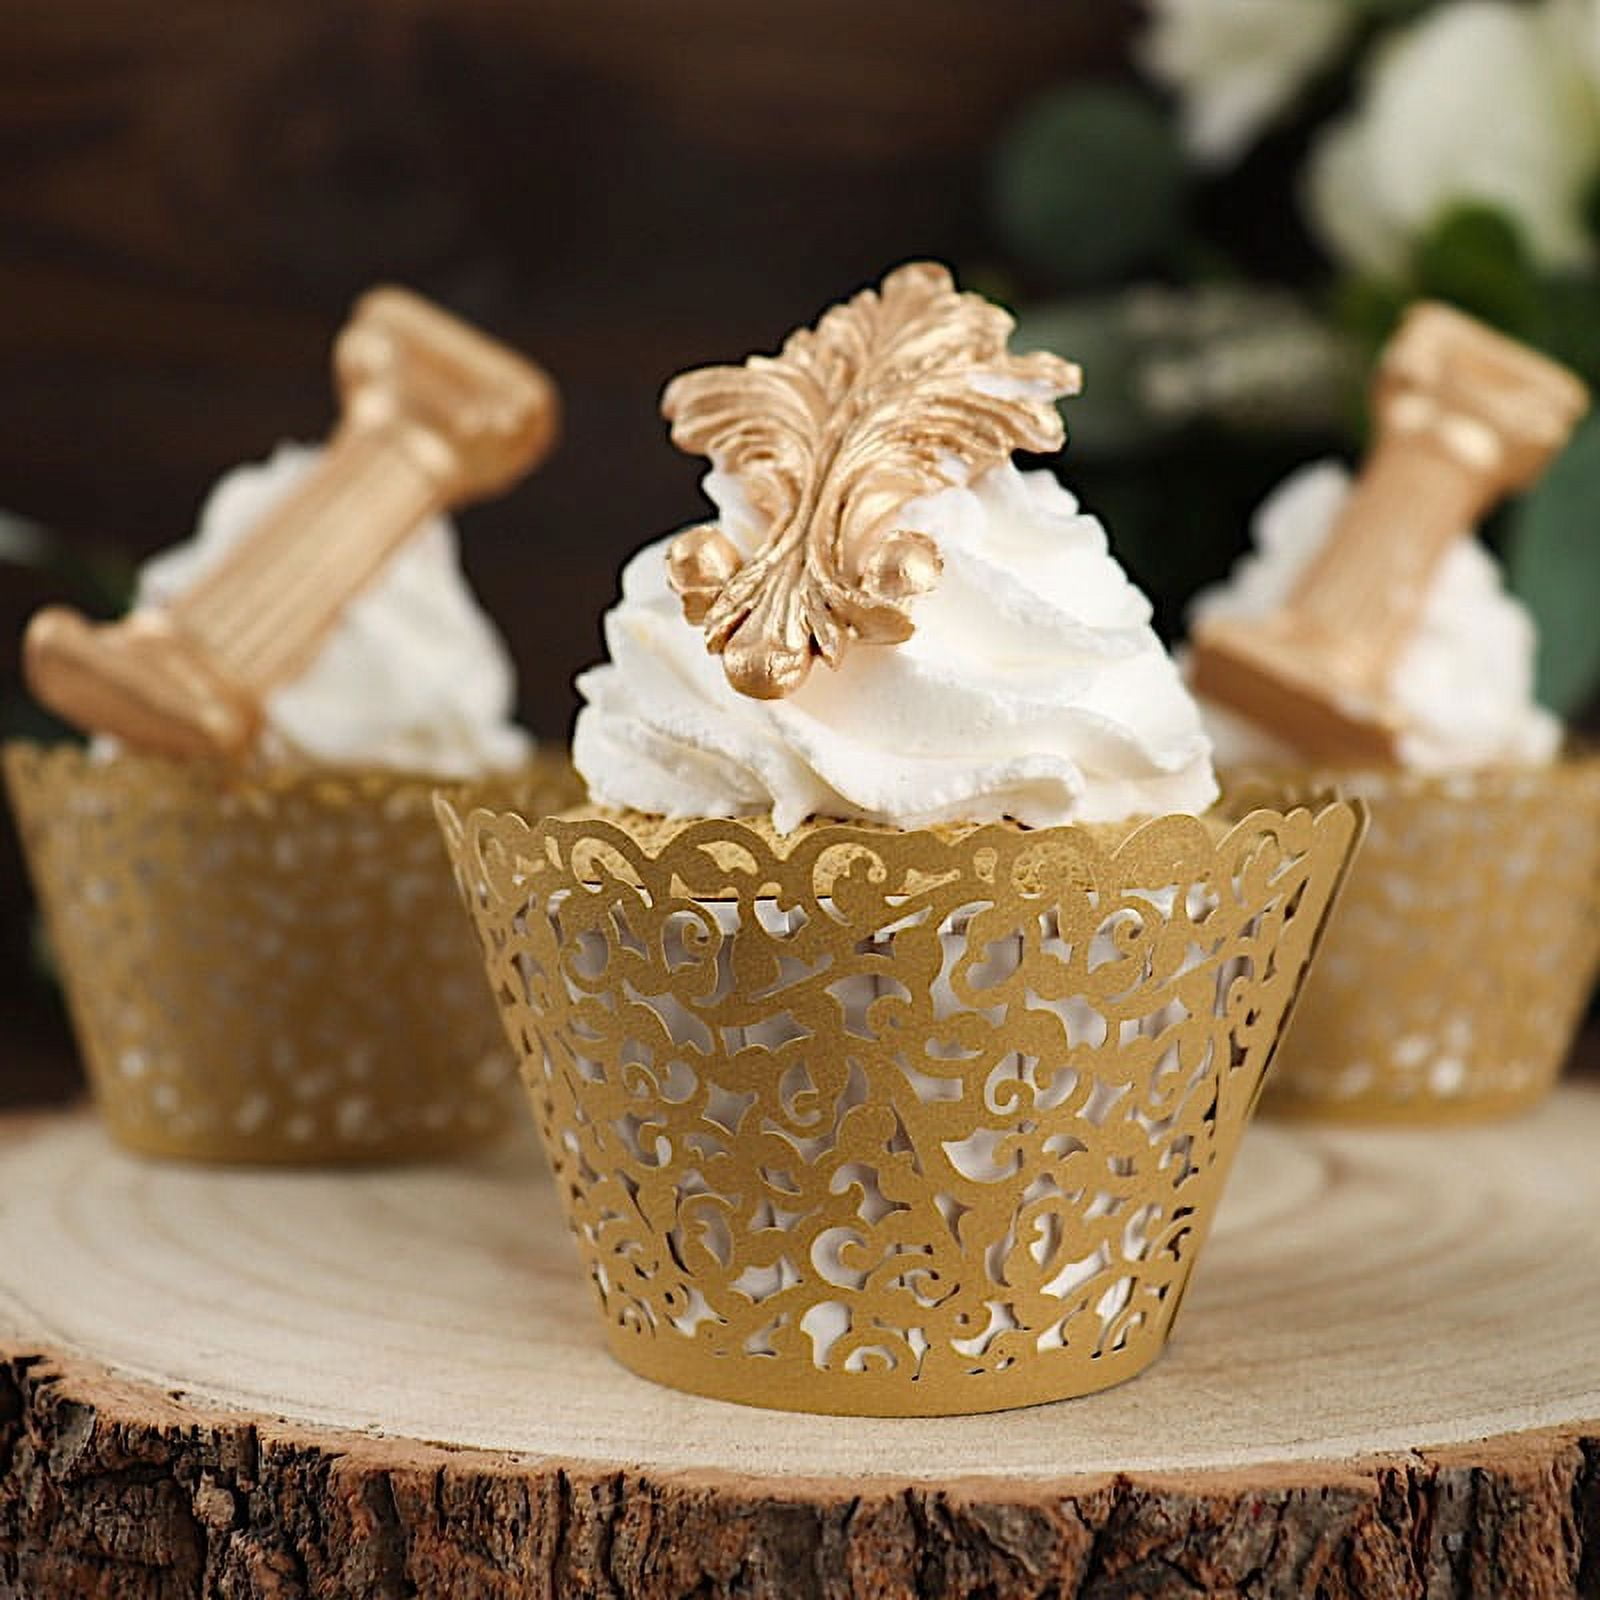 Sparkle and Bash 60 Pack Gold Cupcake Liners and Wrappers - Scalloped Mini  Baking Cups for Muffins, Wedding, Party (1.96 x 1.8 In)